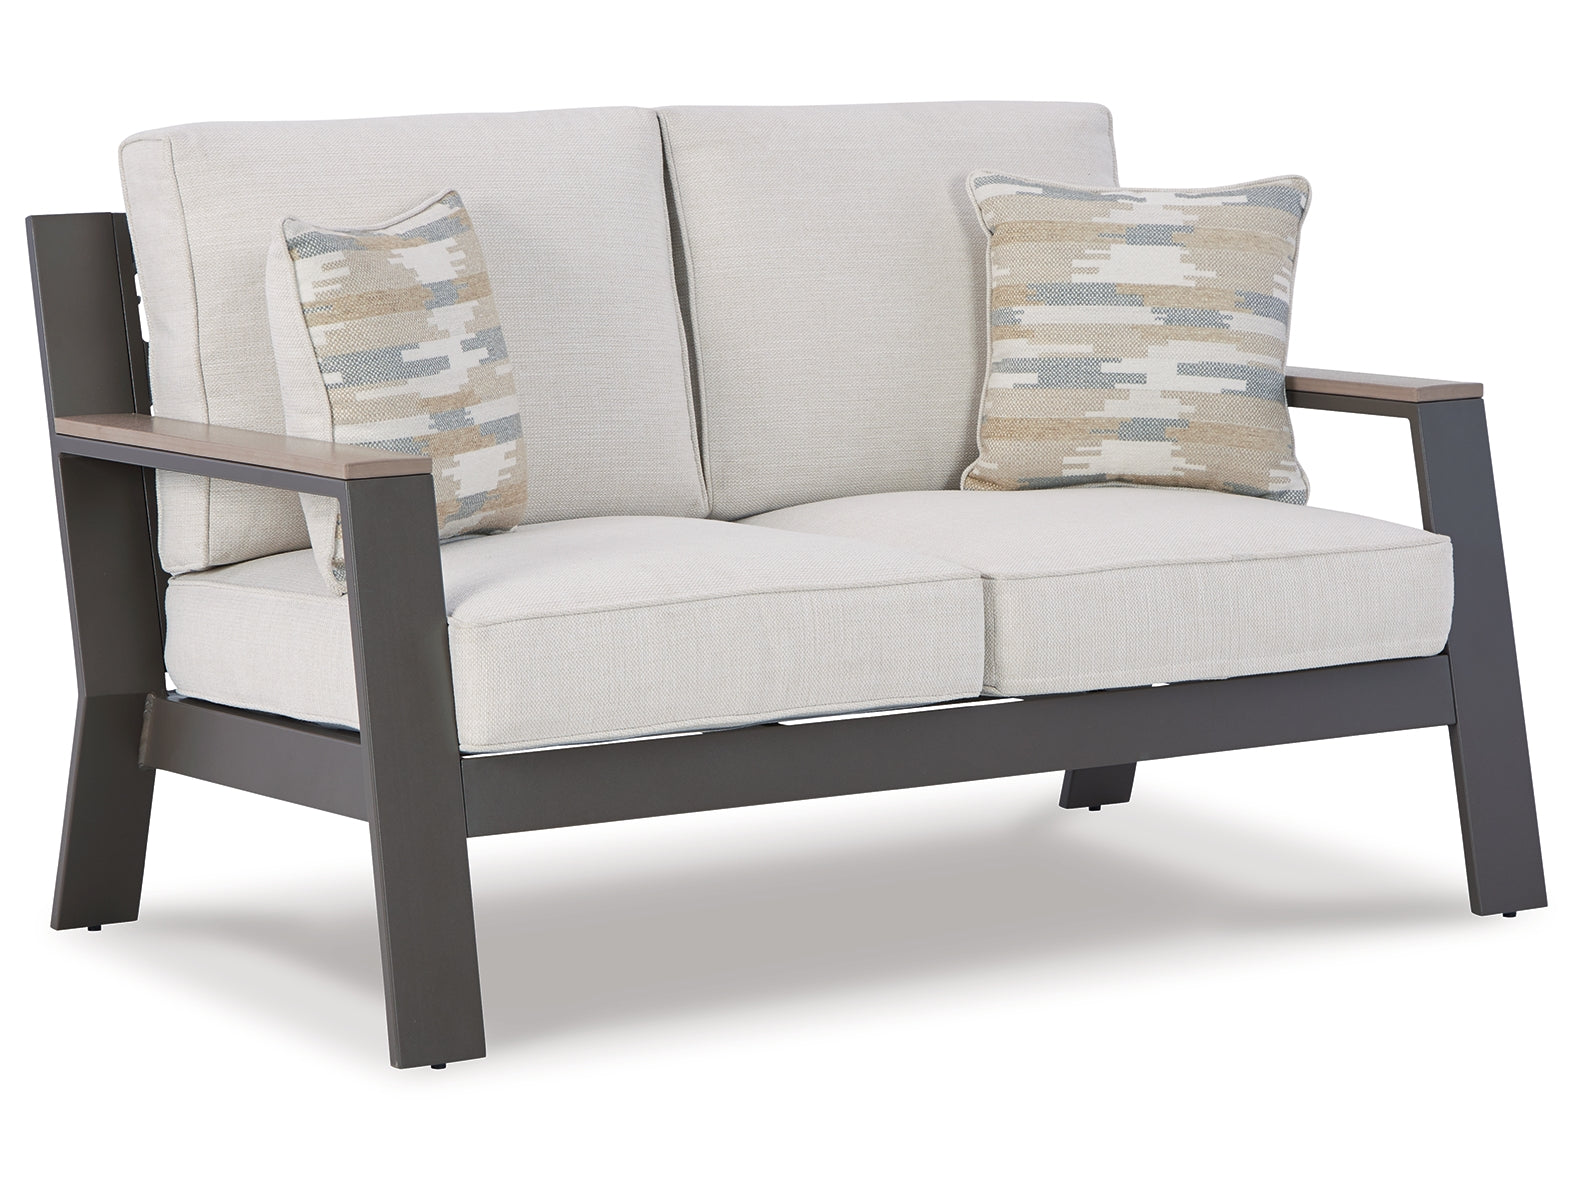 Tropicava Outdoor Loveseat with Coffee Table